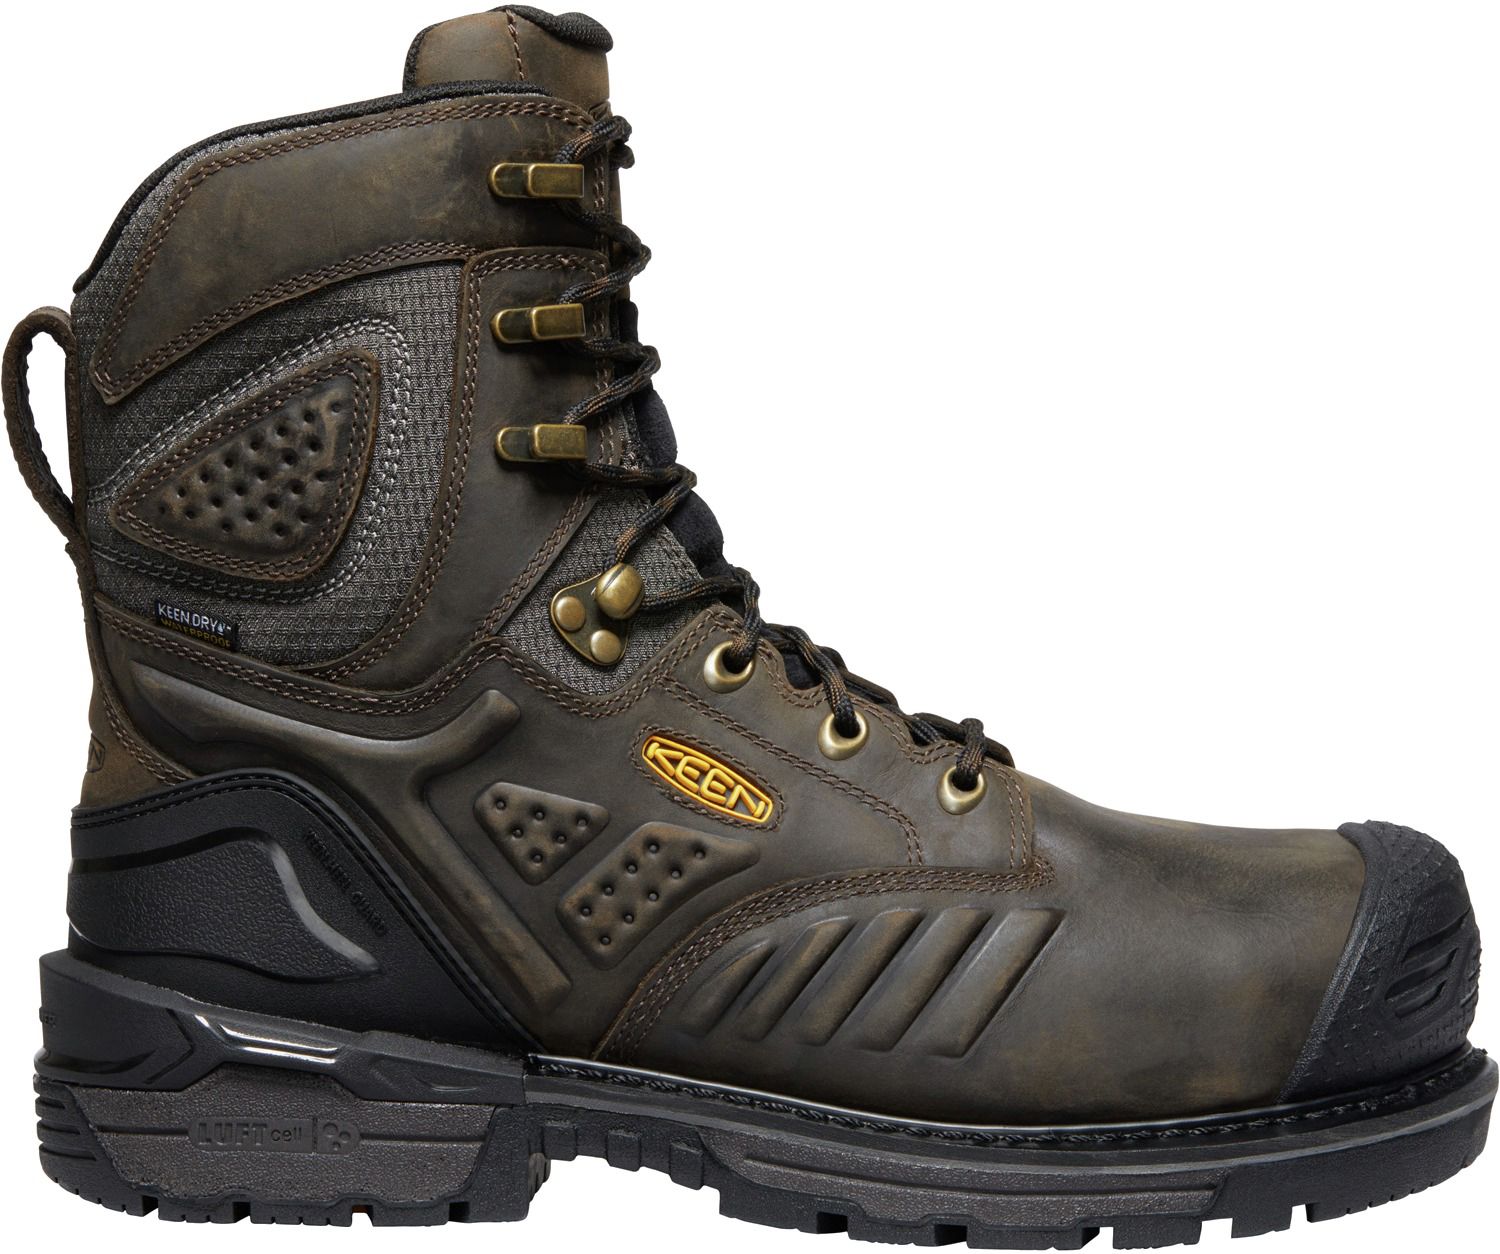 keen work boots on sale